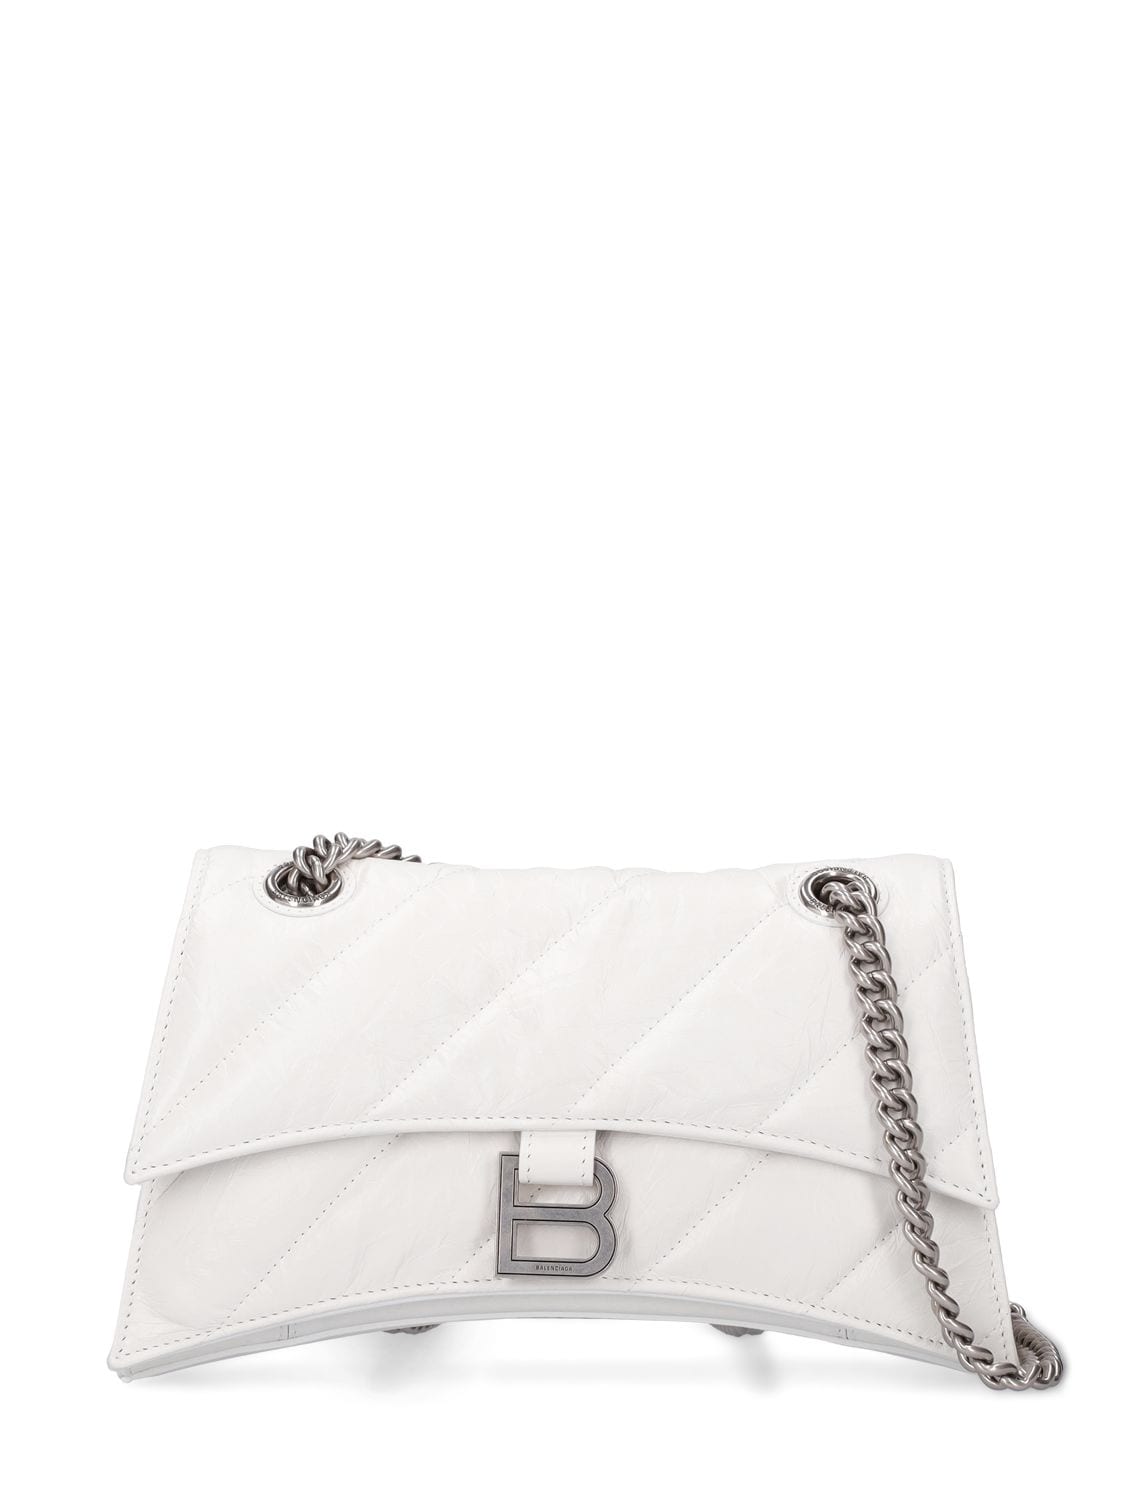 BALENCIAGA Small Crush Chain Quilted Leather Bag